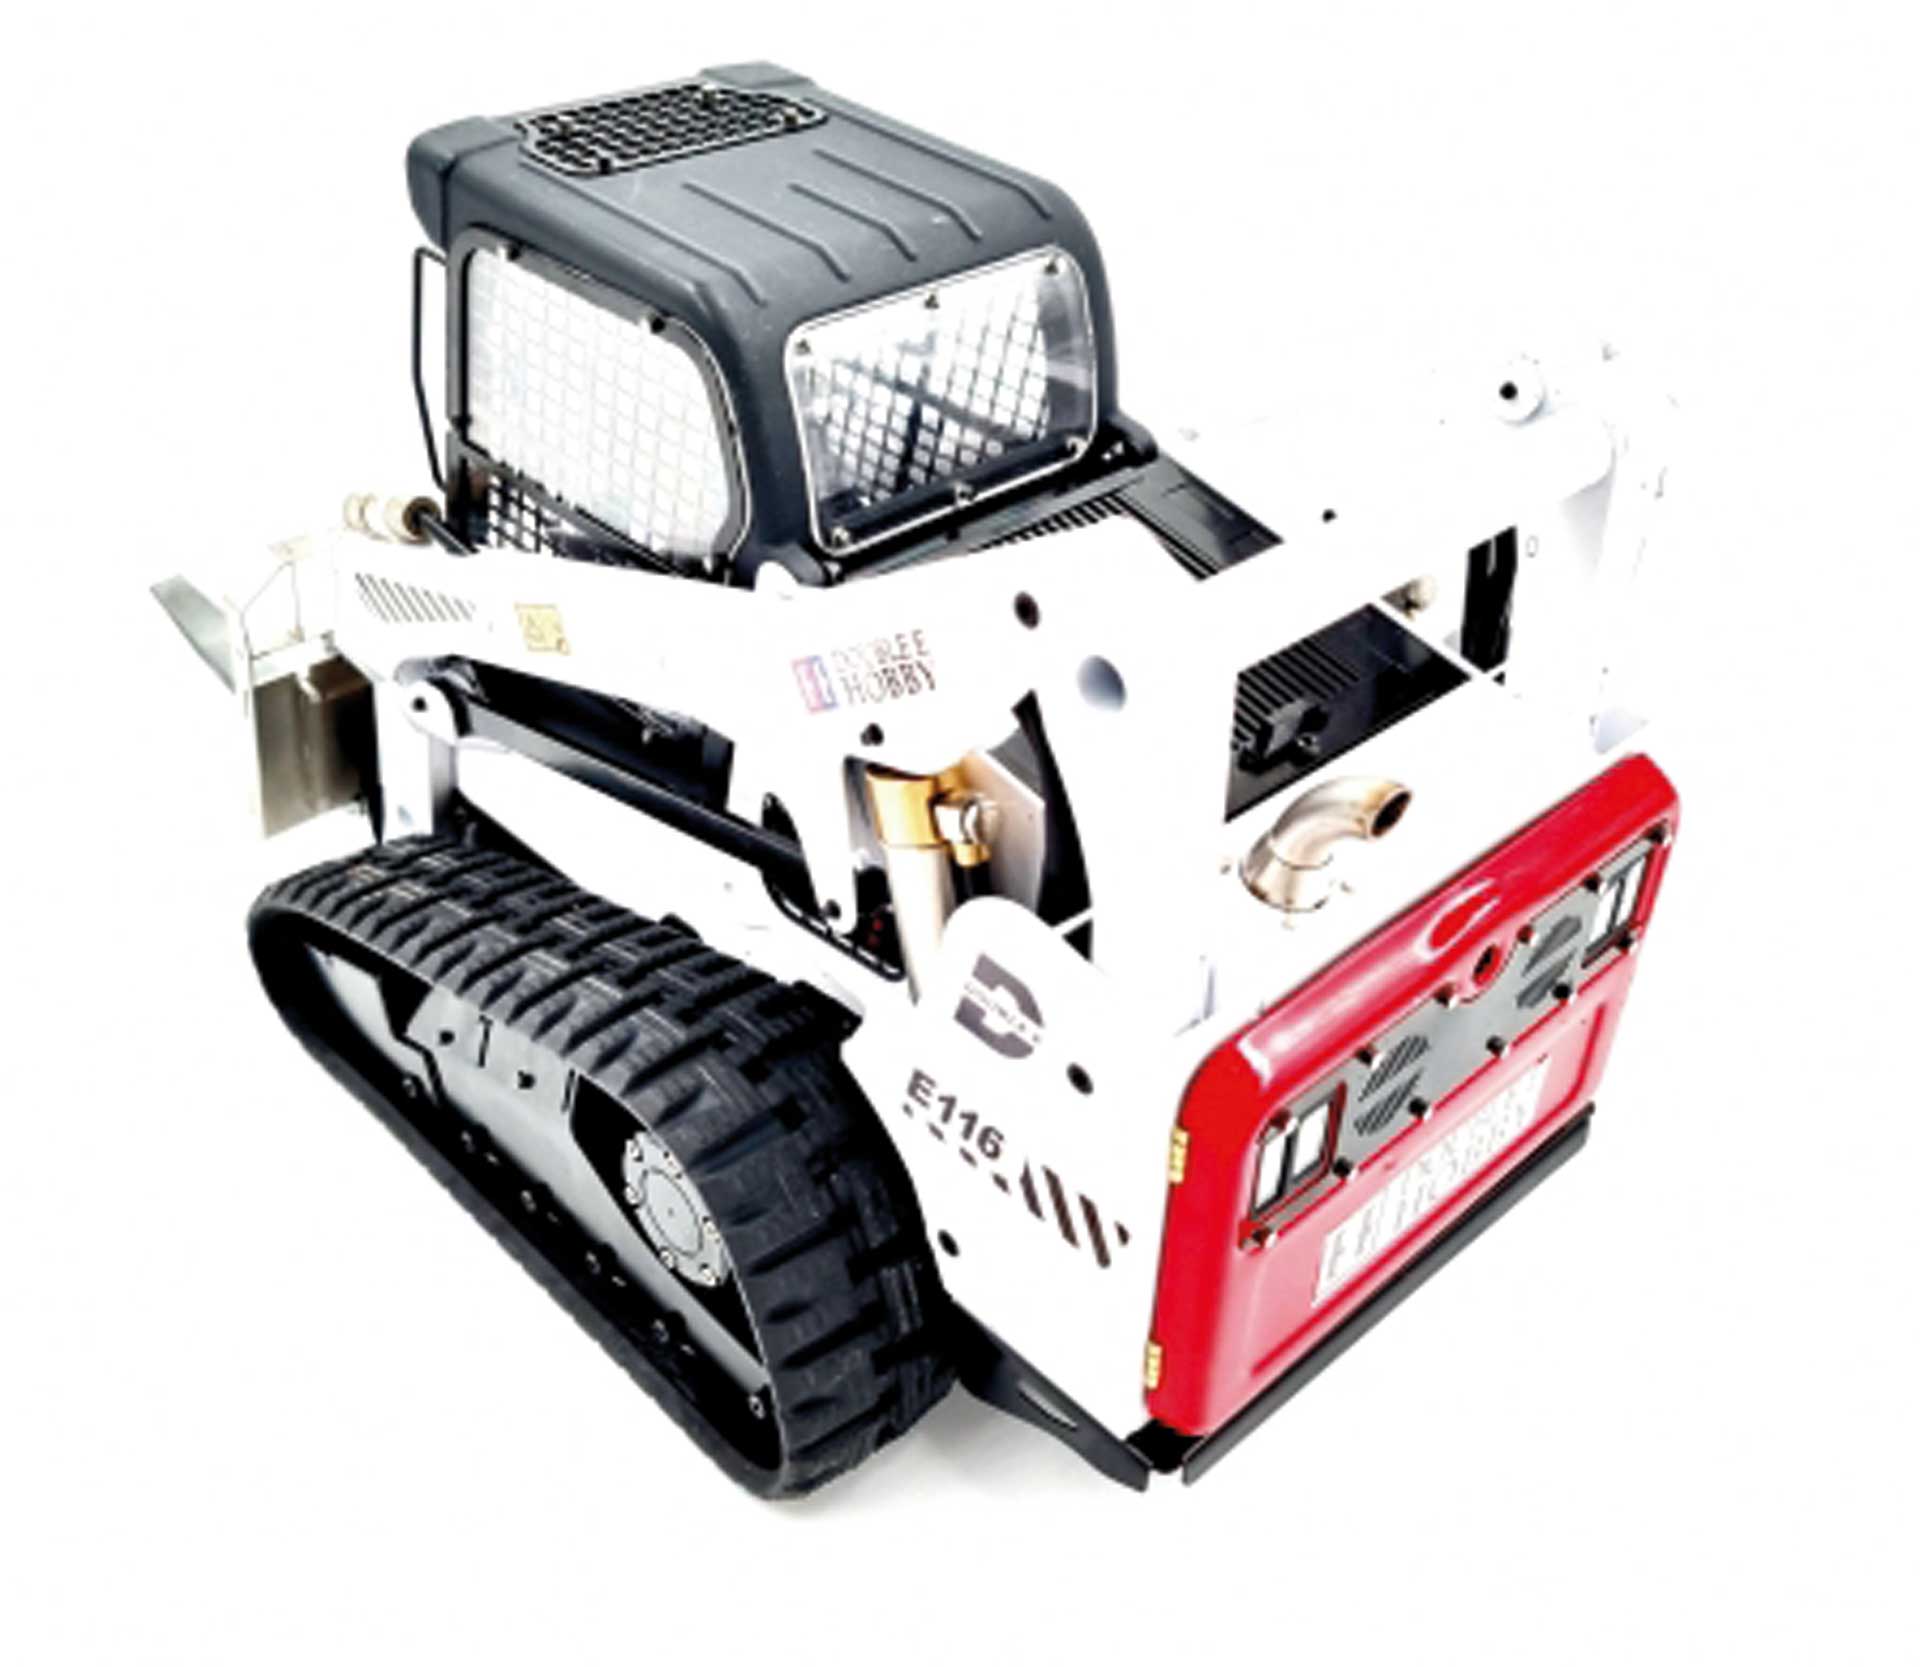 FM-ELECTRICS Hydralik skid steer loader with chains 1/14 RTR